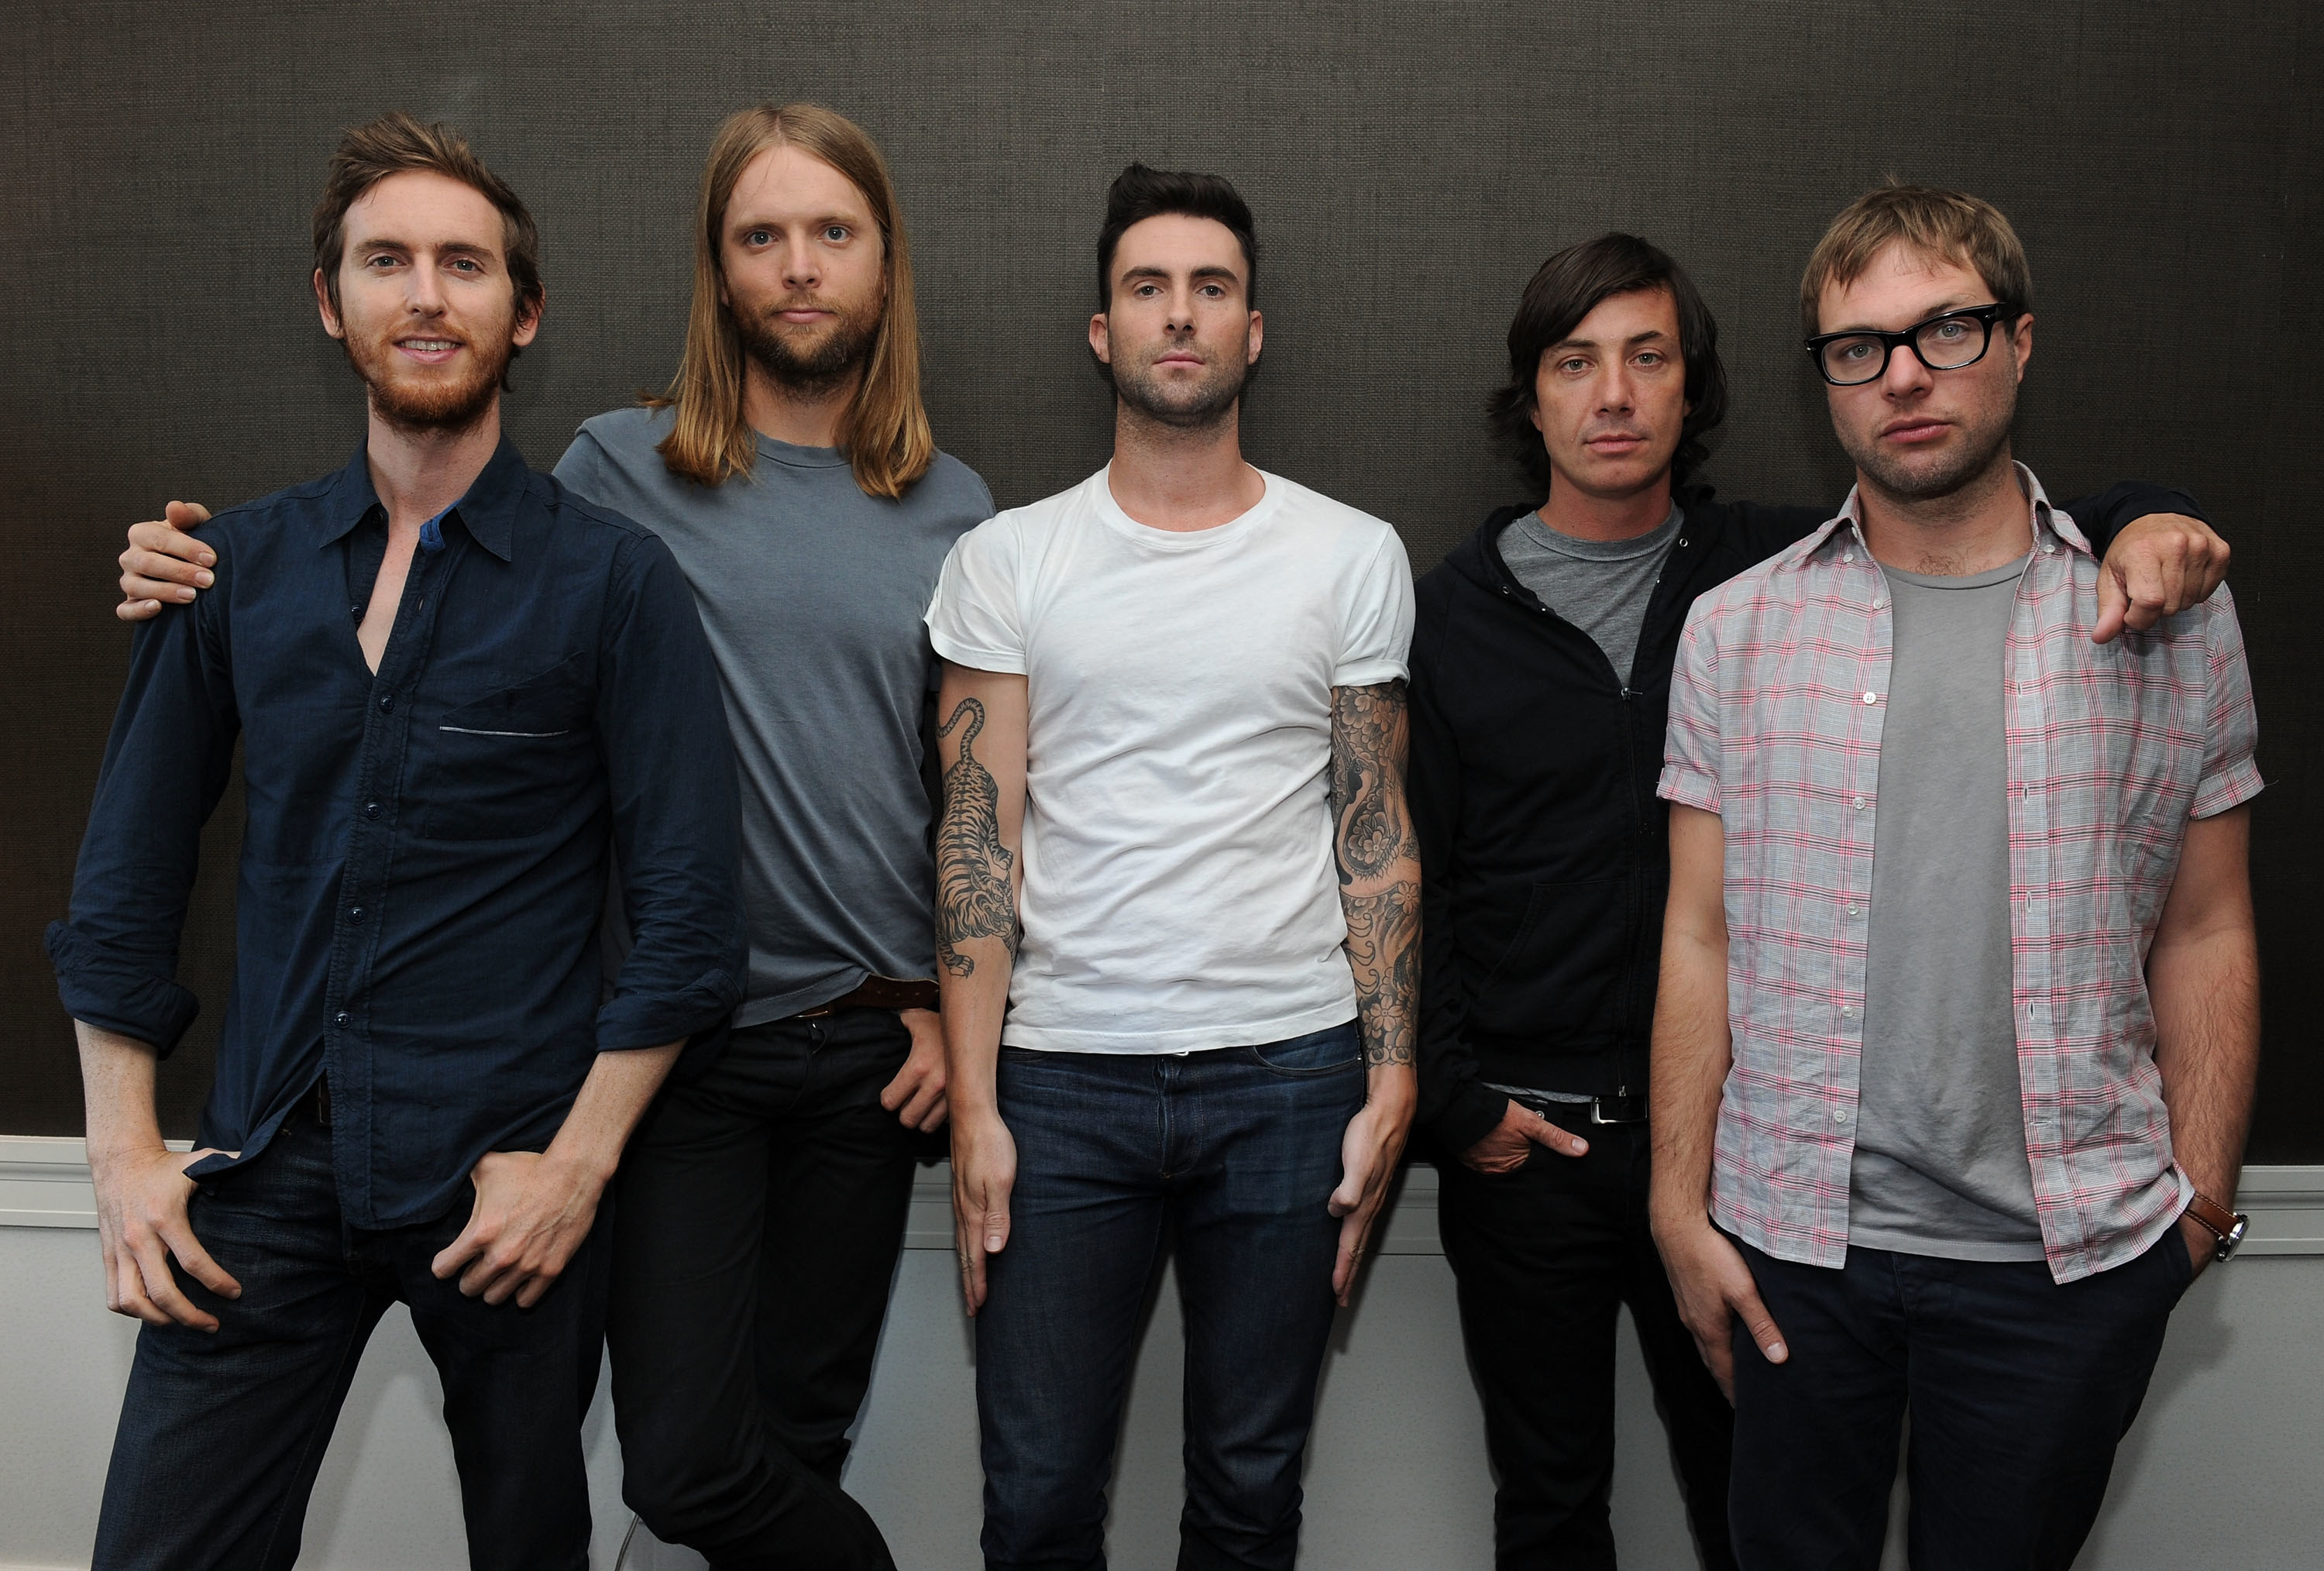 Musicians Jesse Carmichael, James Valentine, Adam Levine, Matt Flynn and Michael Madden of the band Maroon 5 attend the VEVO Summer Sets Concert Series at the Empire Hotel